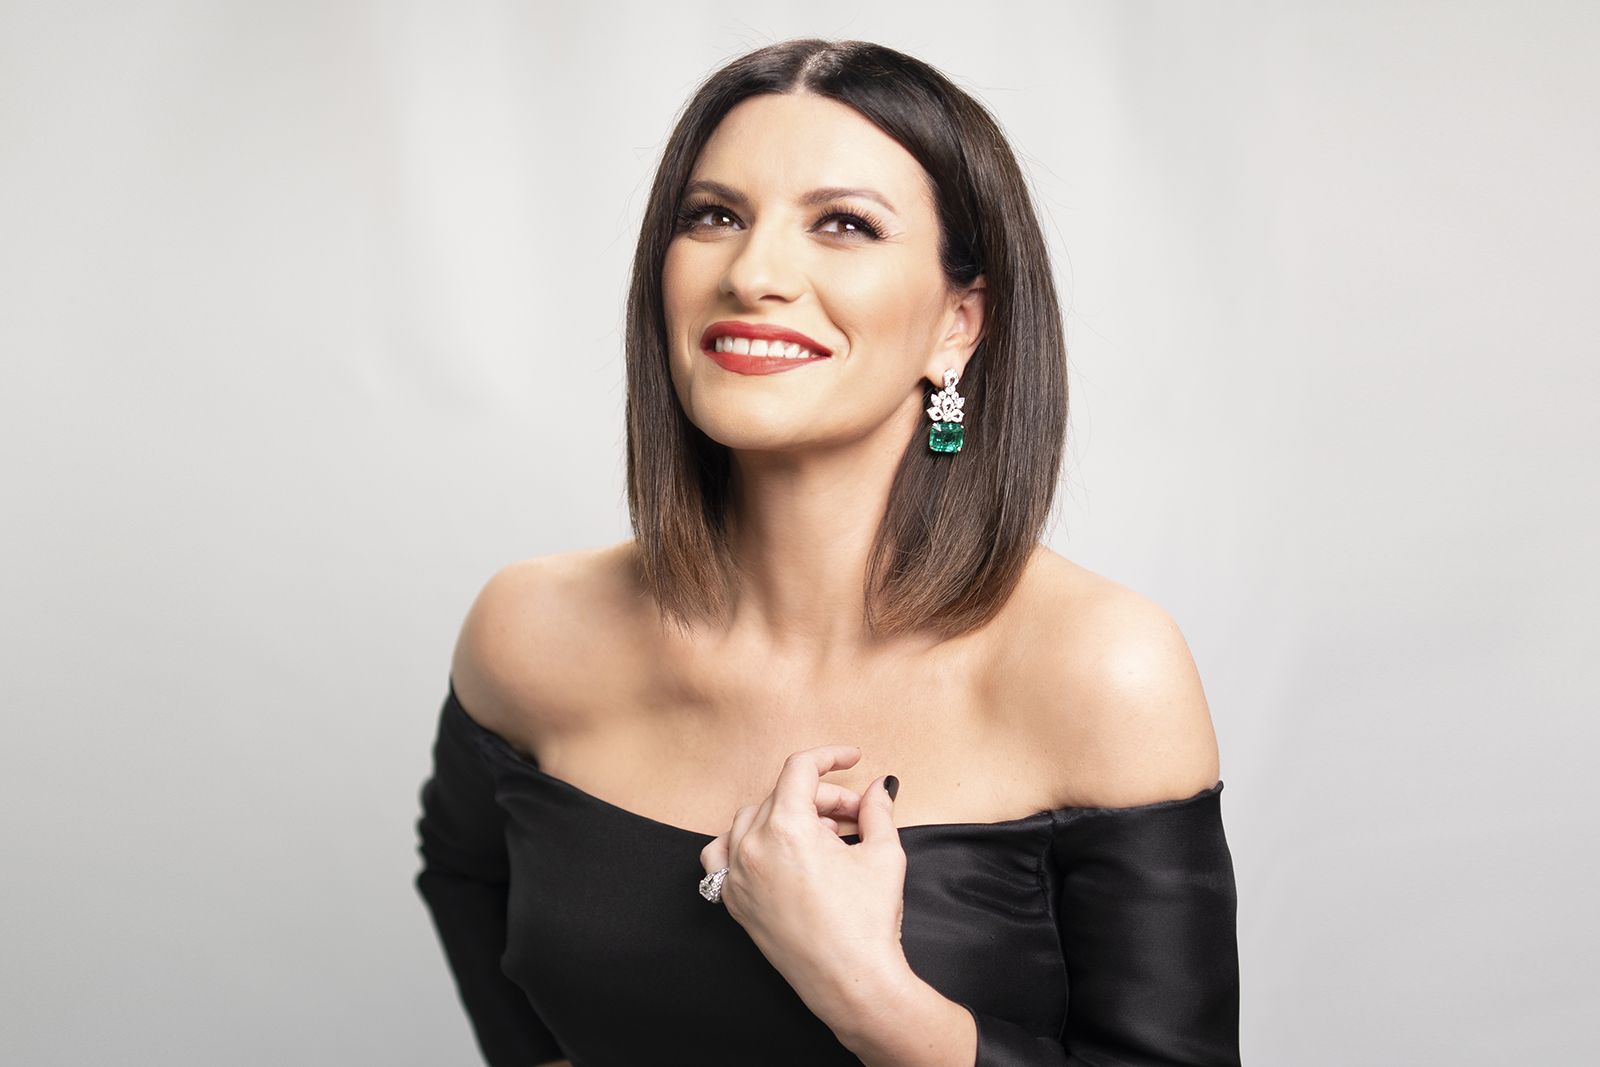 Italian songwriter Laura Pausini at the 93rd Annual Academy Awards in a pair of Bulgari High Jewellery Magnifica earrings with two octagonal-cut Colombian emeralds of 16.02 and 15.05 carats, eight round brilliant-cut diamonds, four pear-shaped diamonds and pavé-set diamonds 